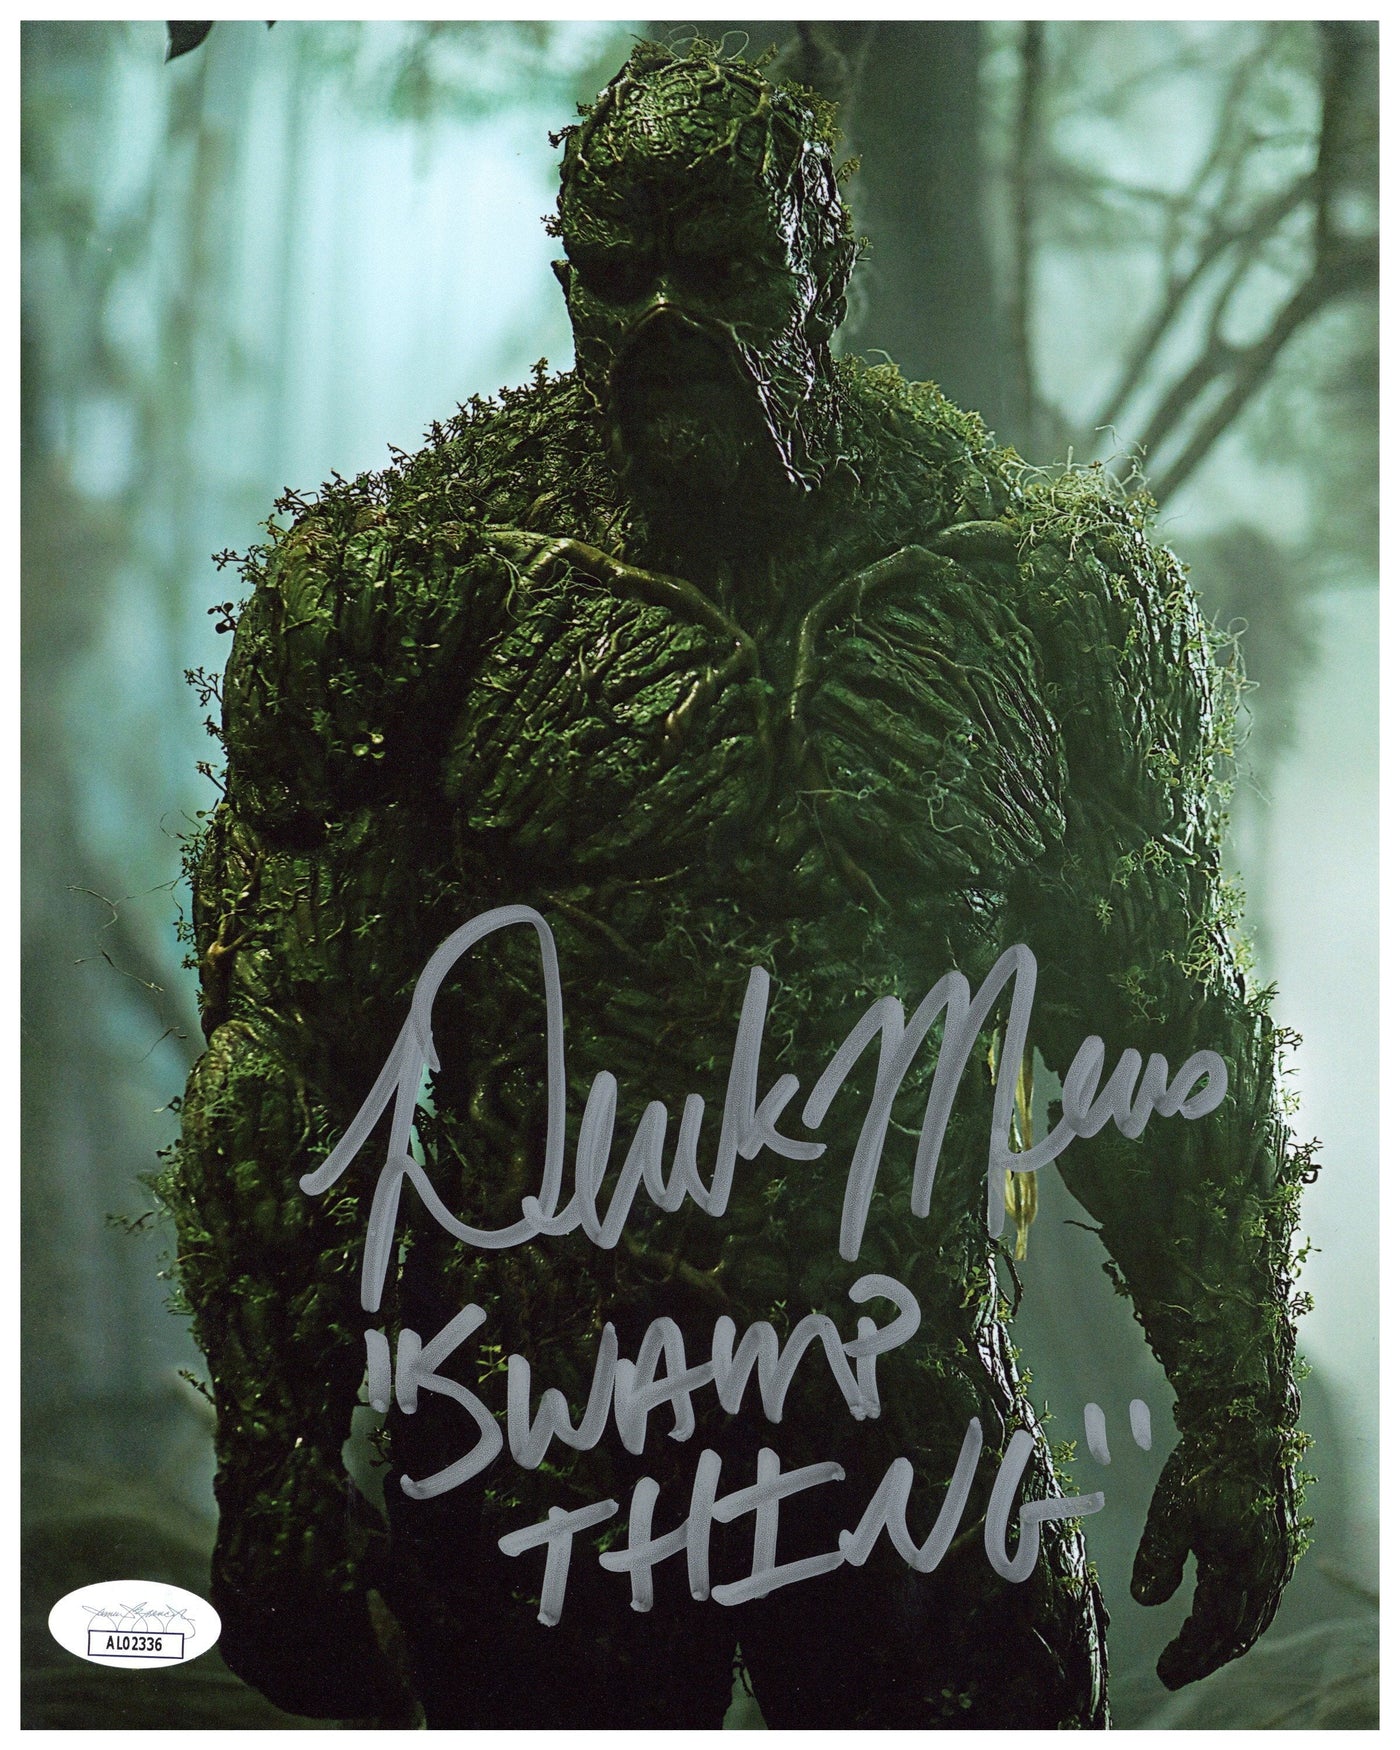 Derek Mears Signed 8x10 Photo Swamp Thing Autographed JSA COA